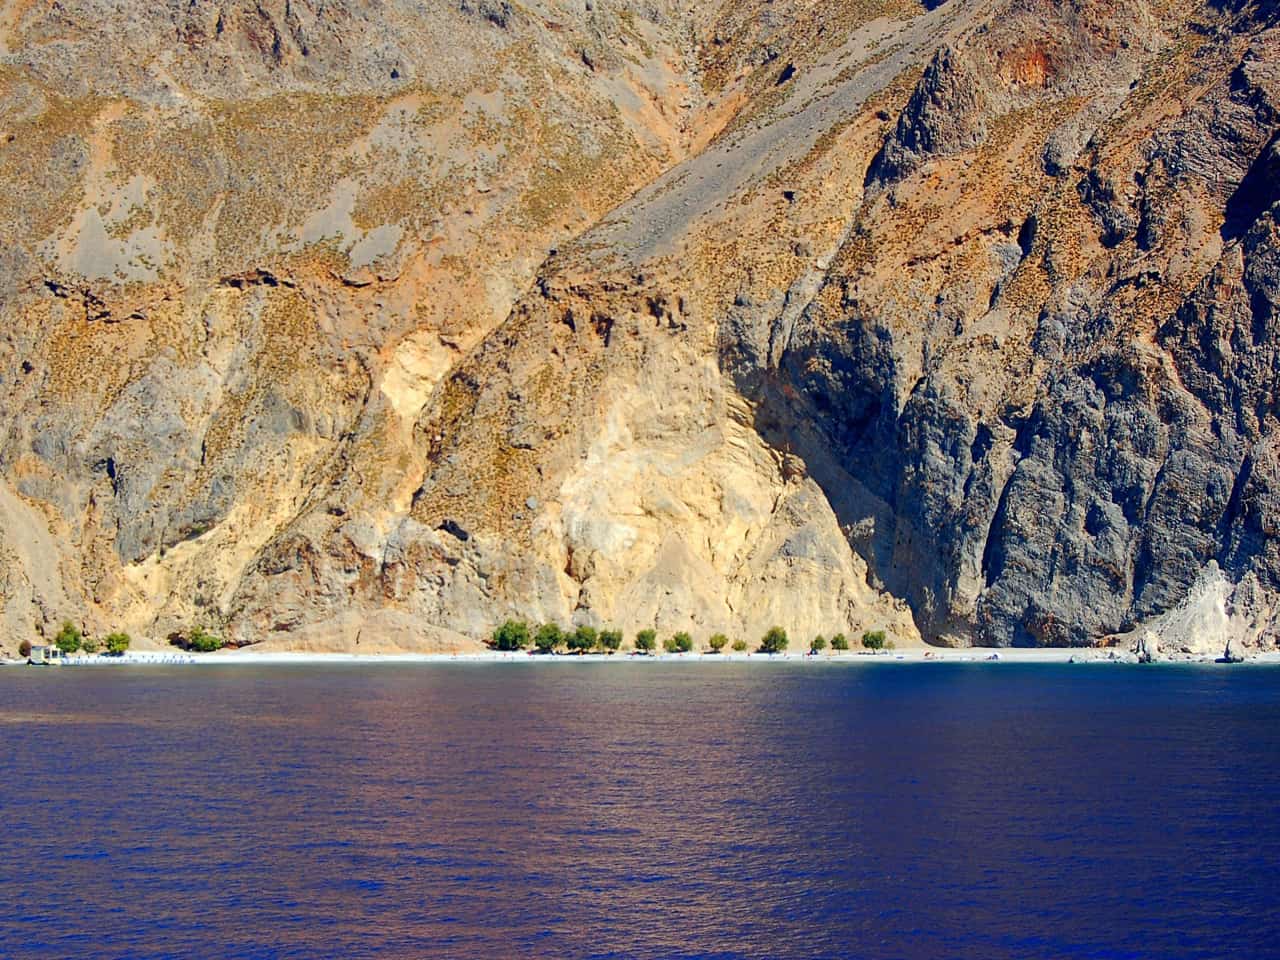 sweetwater beach panoramic view, boat trip south chania crete